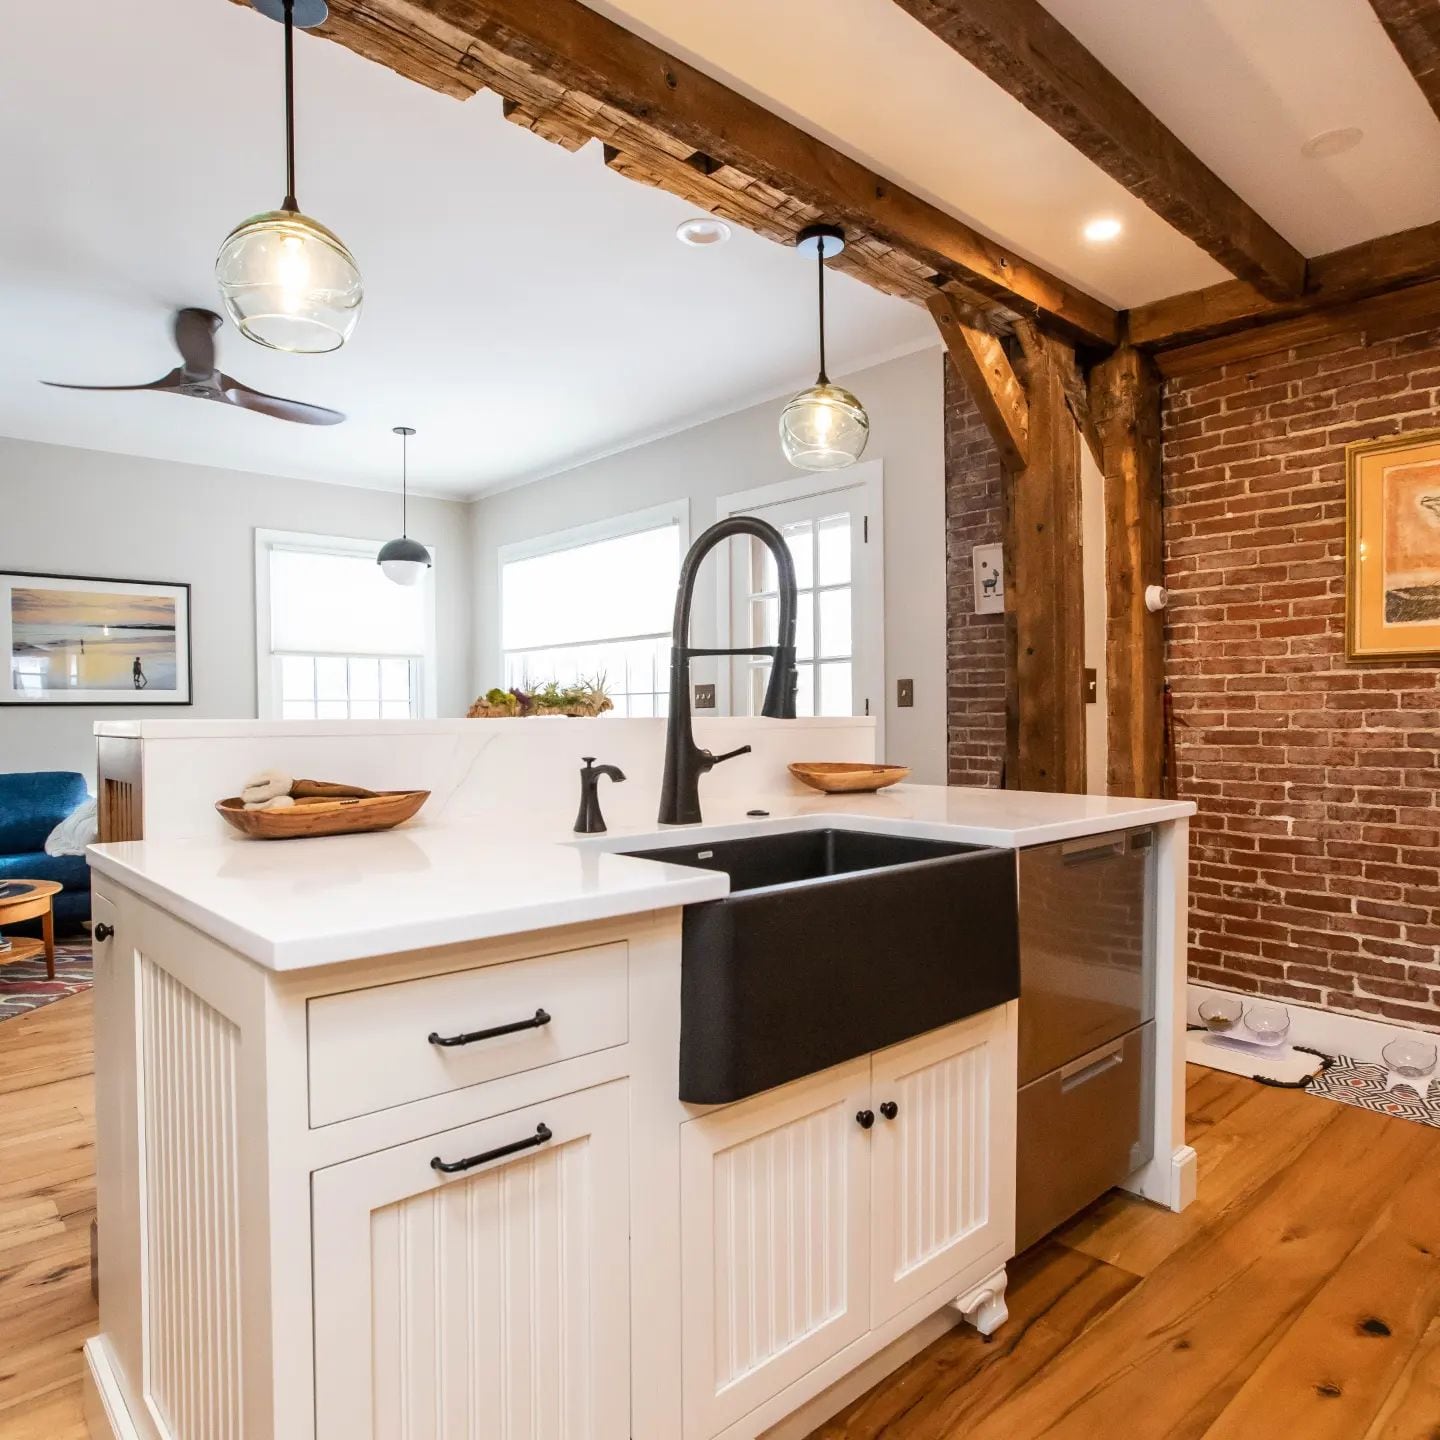 Before and After: Rustic Kitchen Goes Back to its Roots